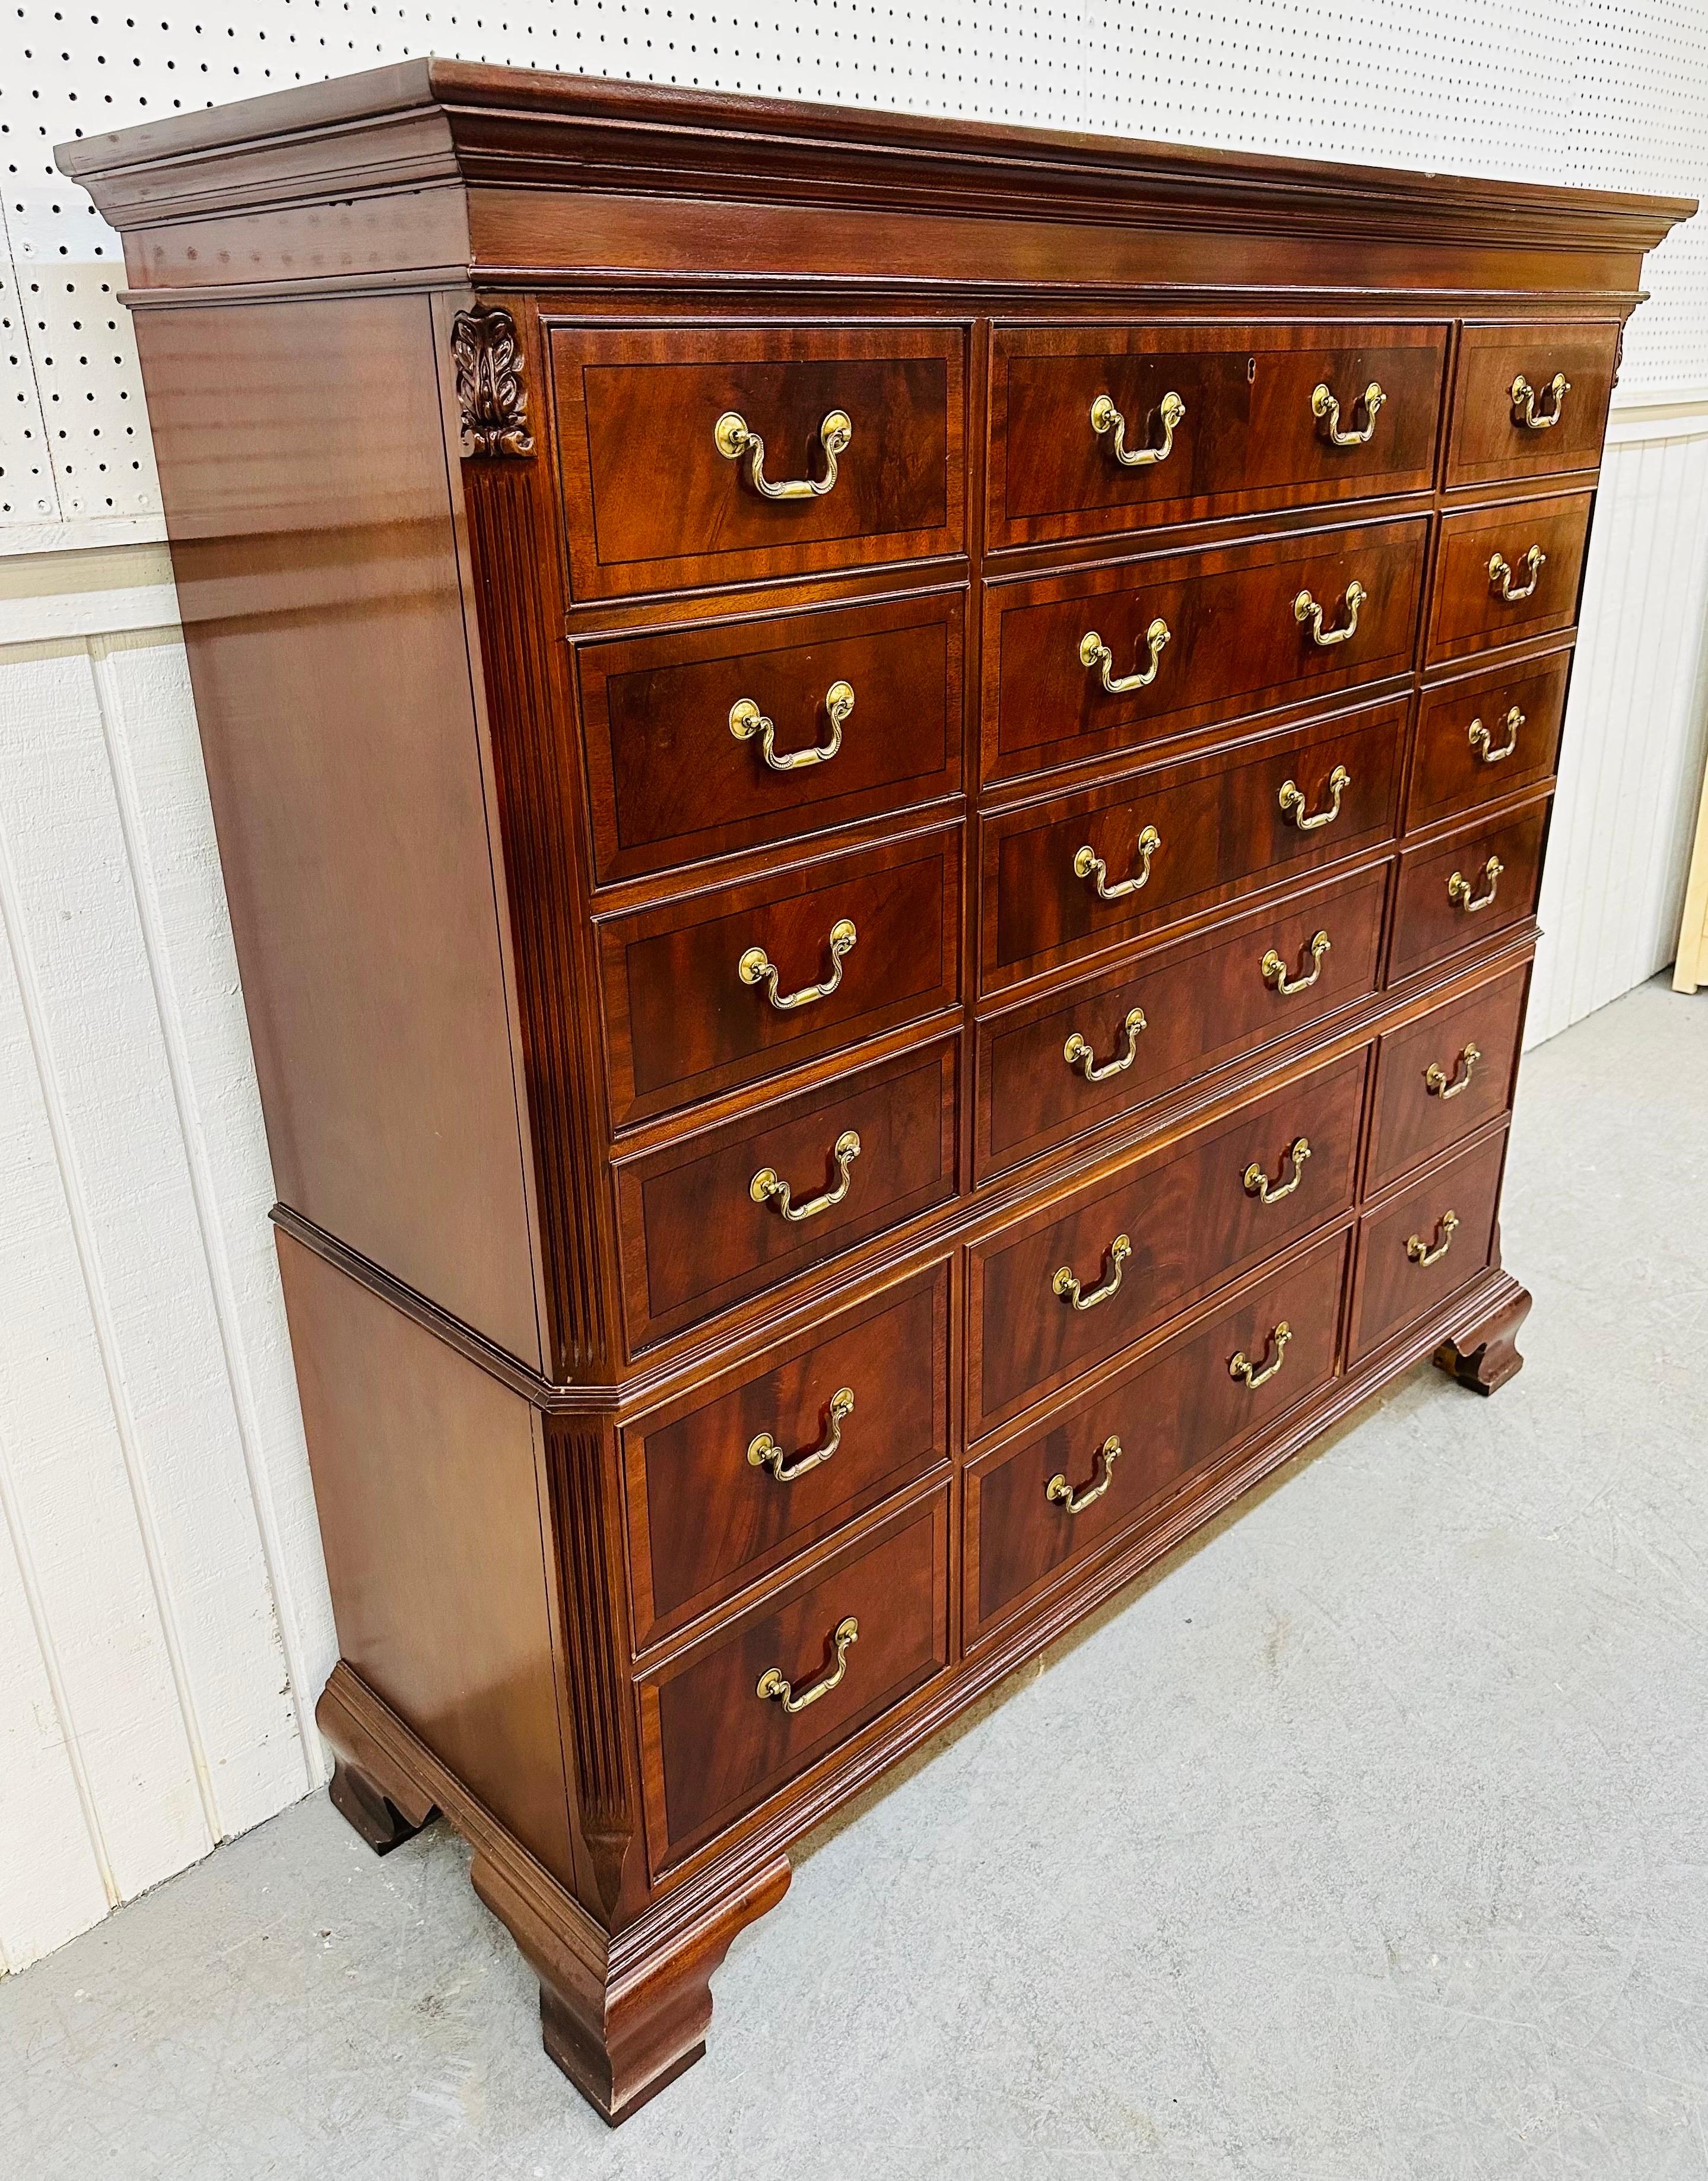 This listing is for a Vintage Ethan Allen “18th Century” Mahogany Chest of Drawers. Featuring a straight line design, rectangular top, eighteen drawers for storage, original hardware, and a beautiful mahogany finish. This is an exceptional